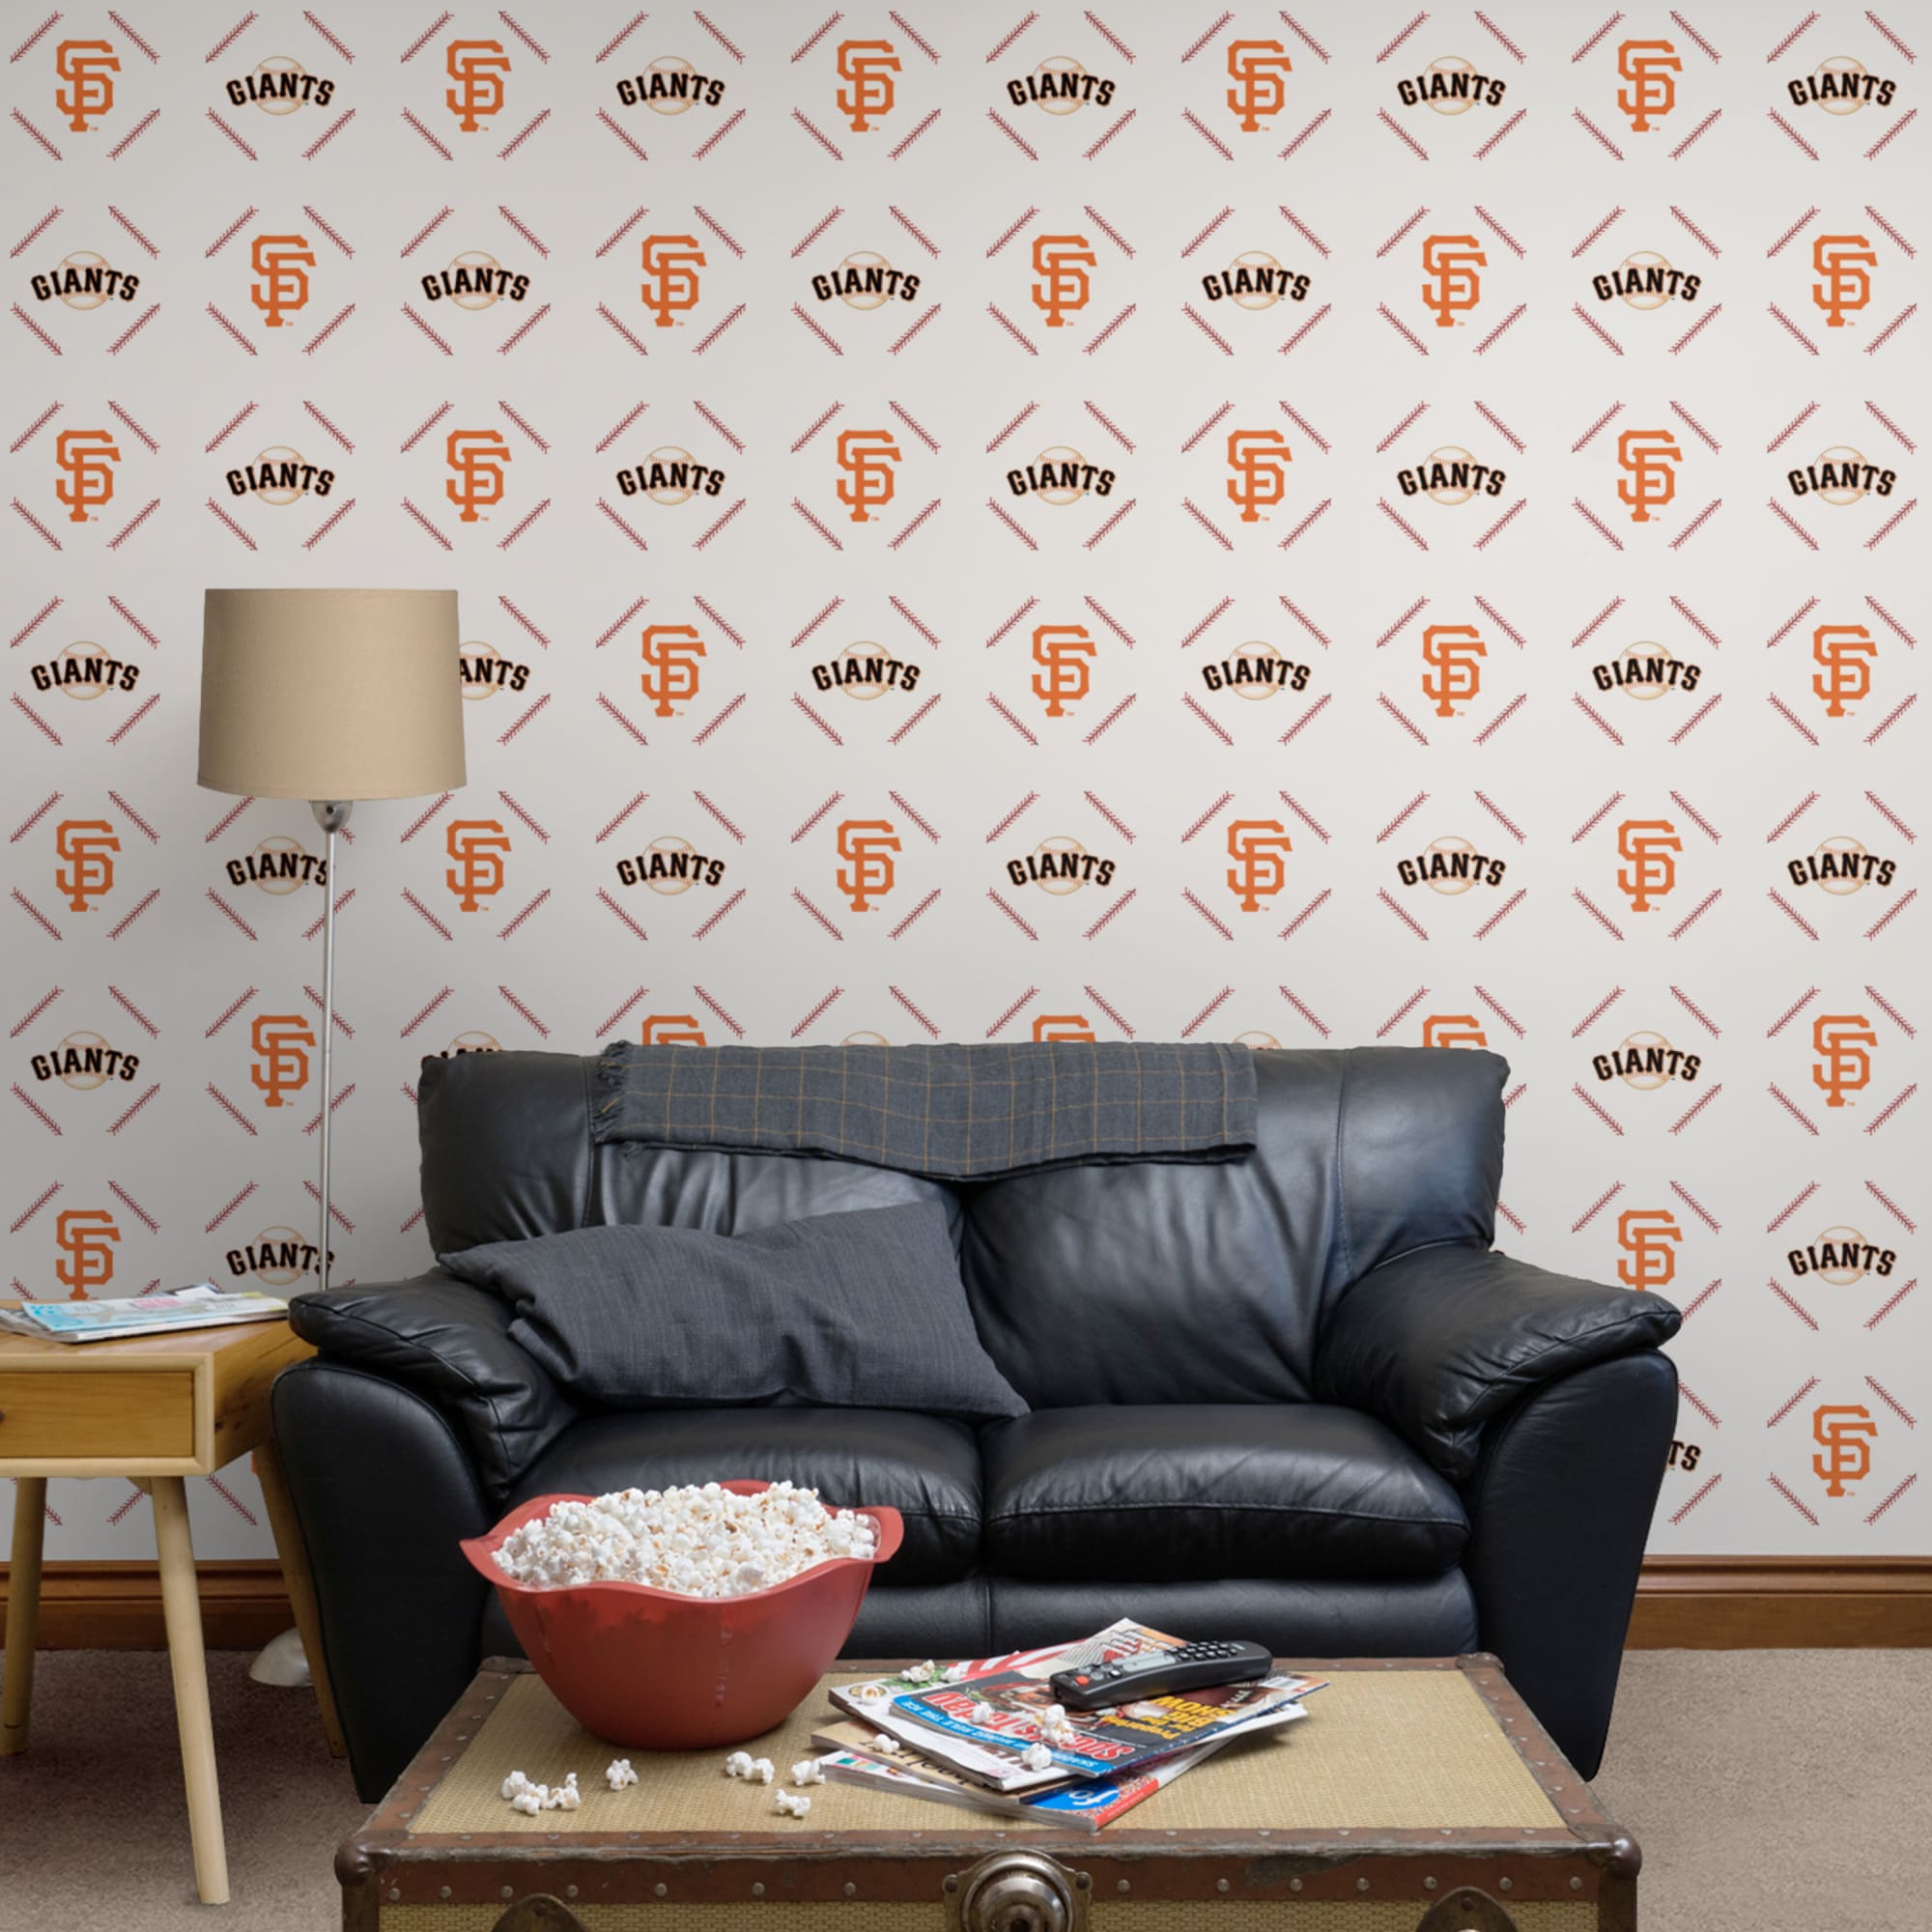 San Francisco Giants: Stitch Pattern - Officially Licensed Removable Wallpaper 12" x 12" Sample by Fathead